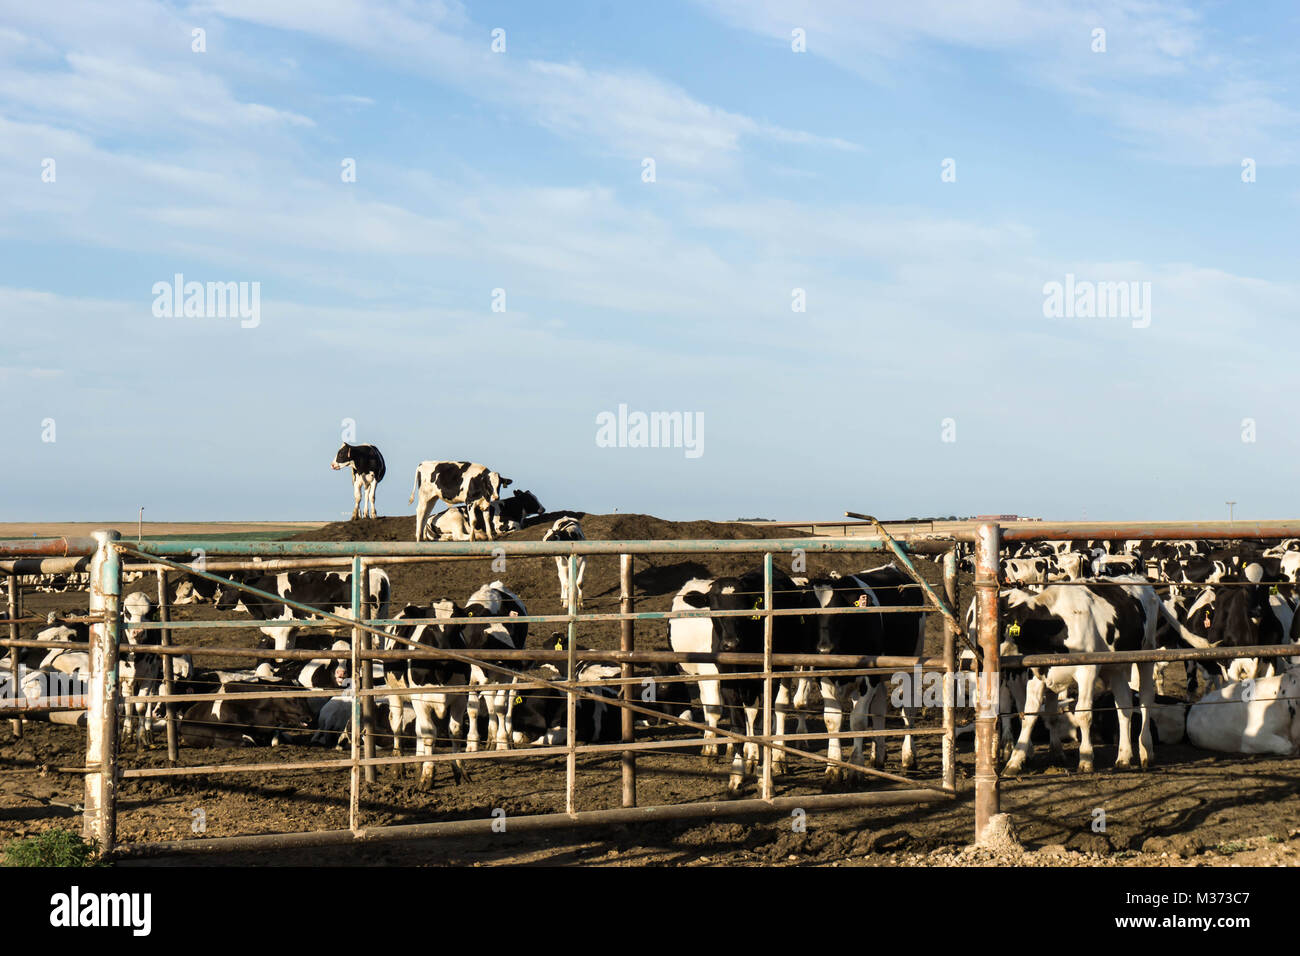 many cows fenced in and waiting to be butchered at a slaughterhouse Stock Photo